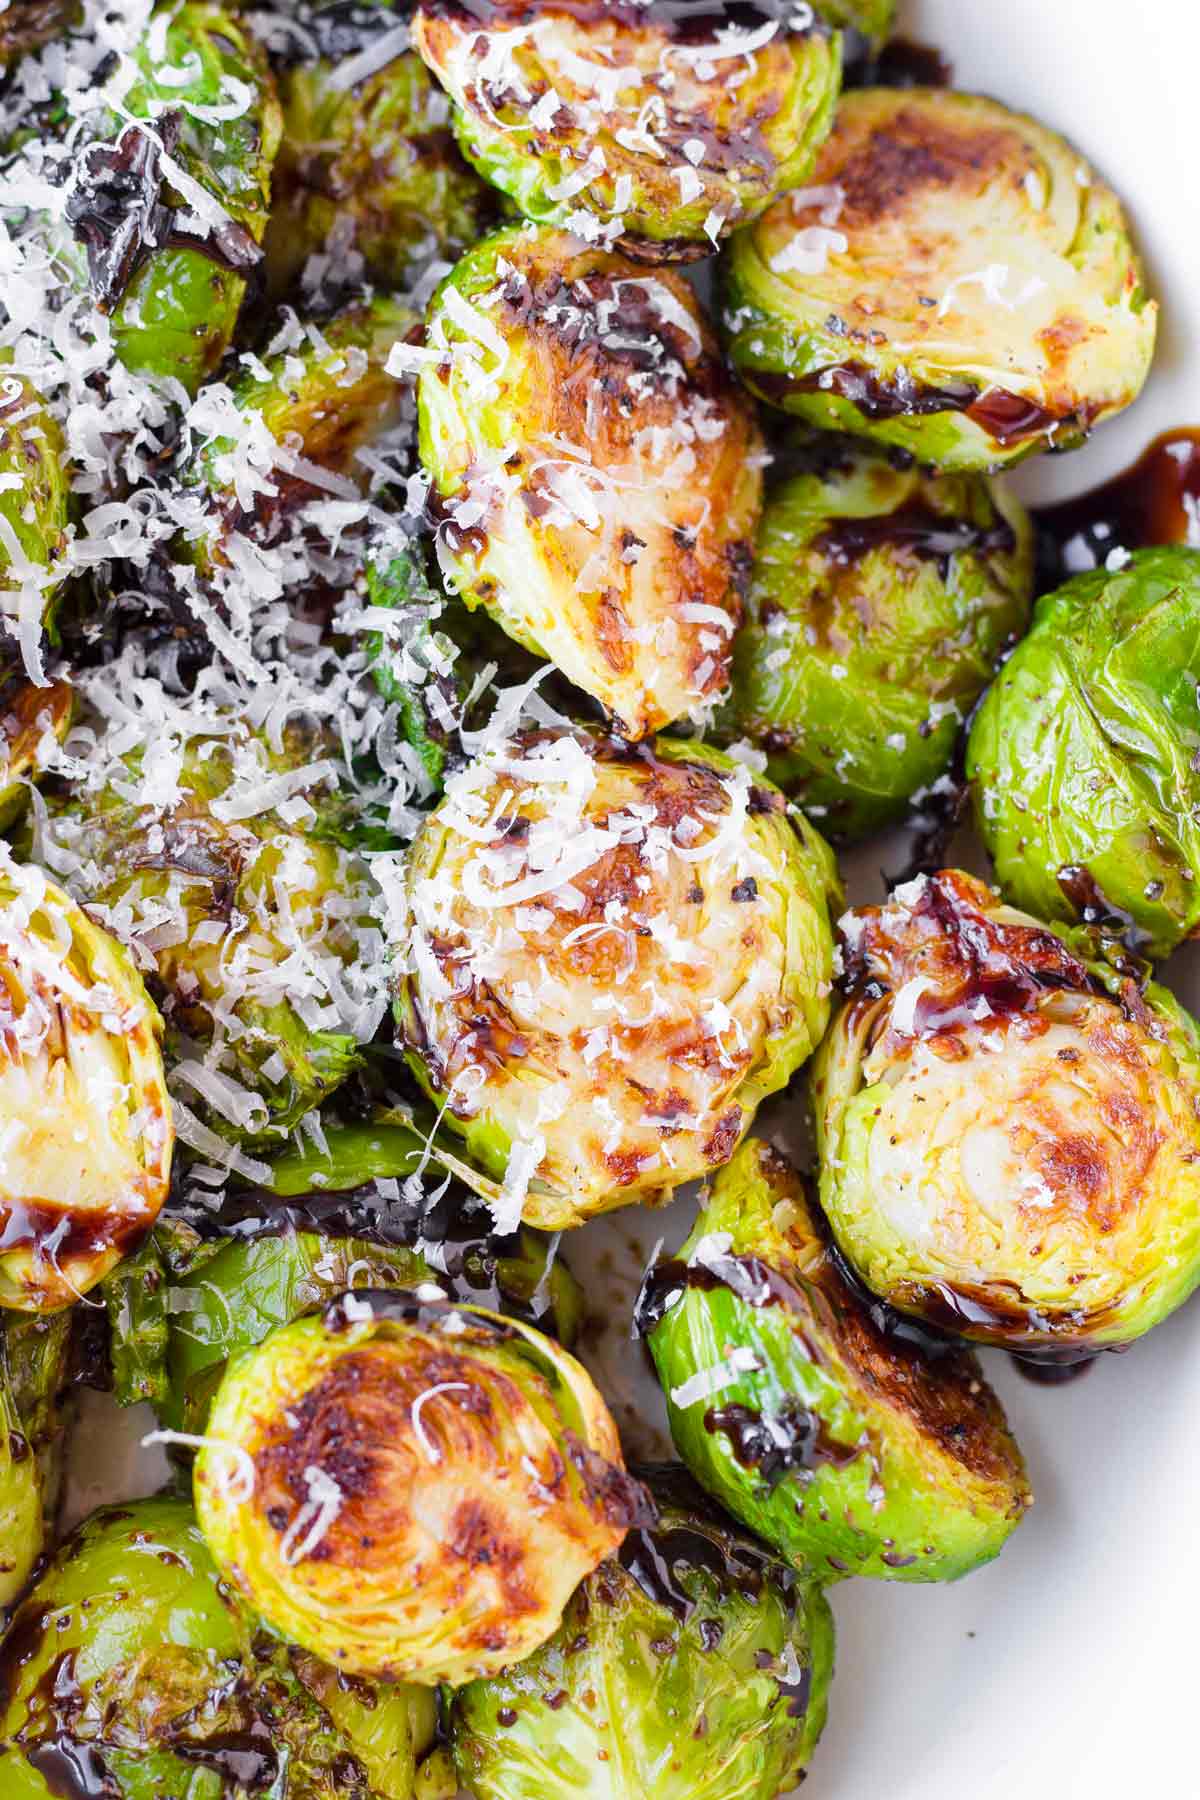 balsamic glazed Brussel sprouts topped with fresh parmesan cheese in a serving dish ready to serve.